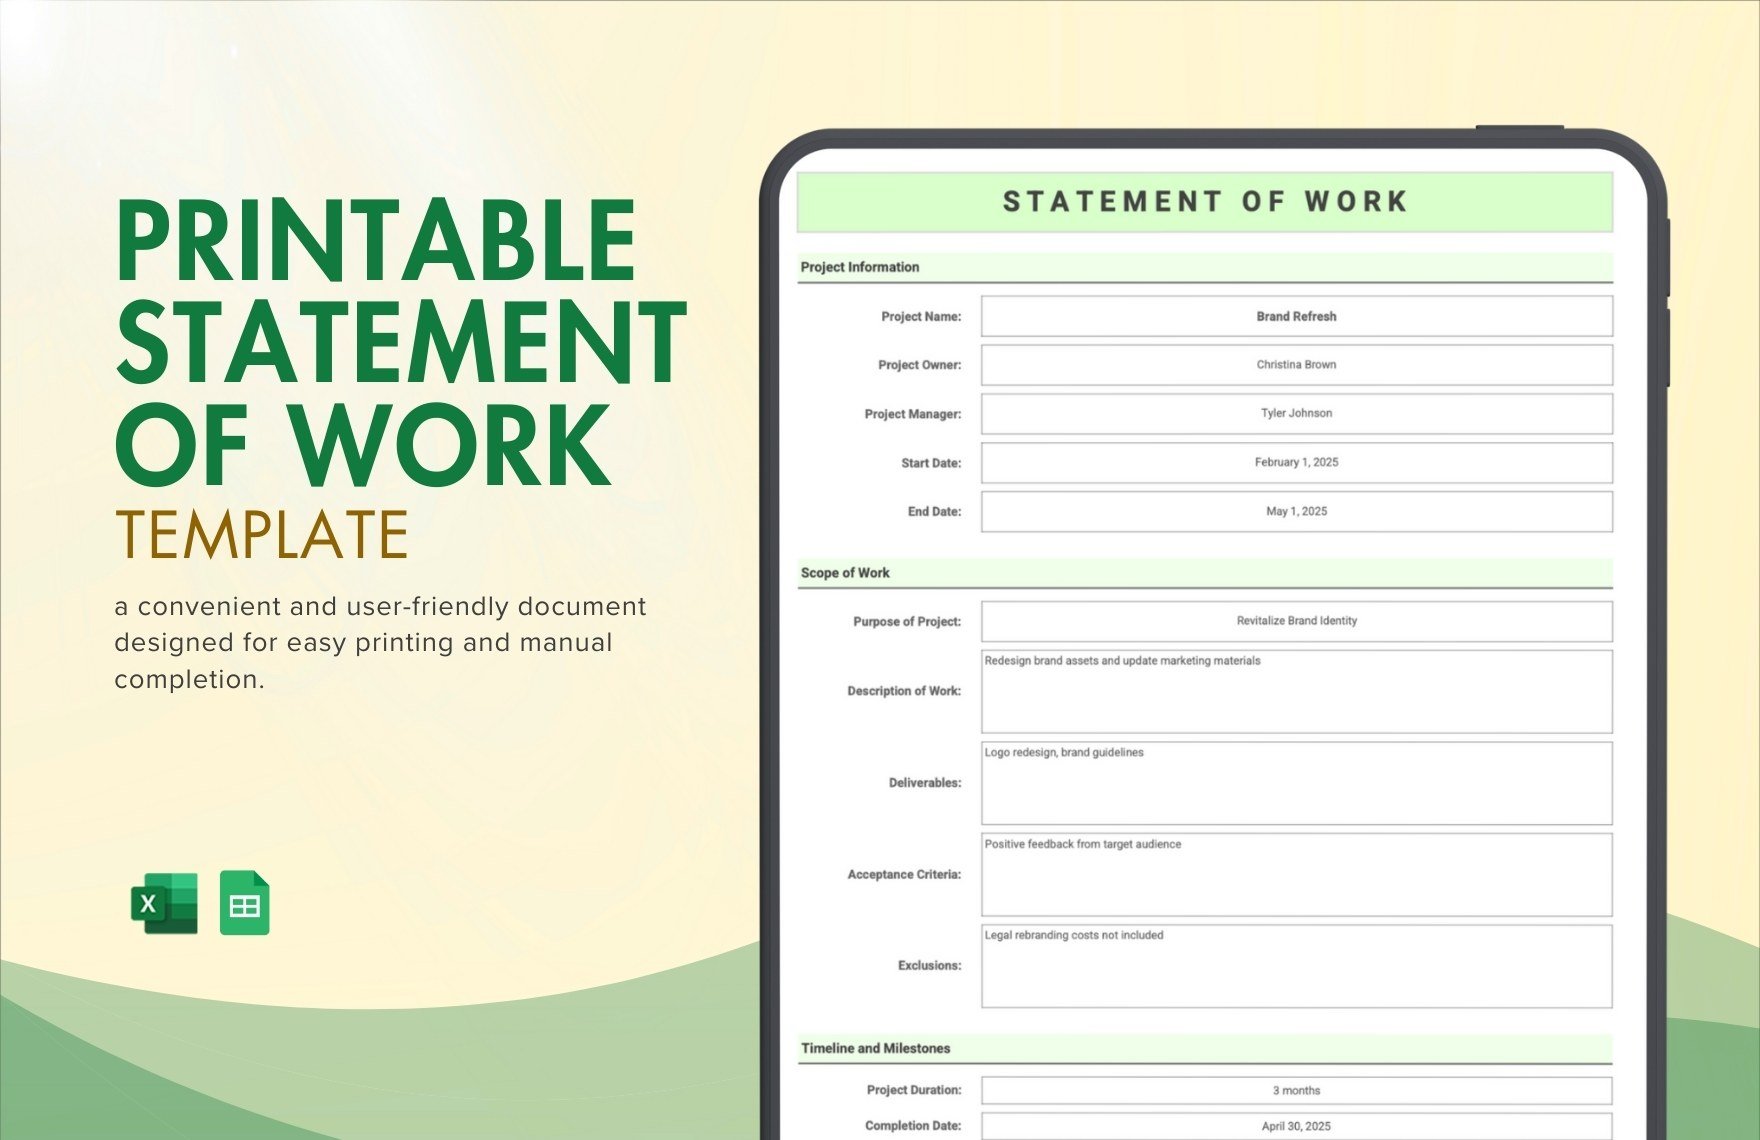 Printable Statement of Work Template in Excel, Google Sheets